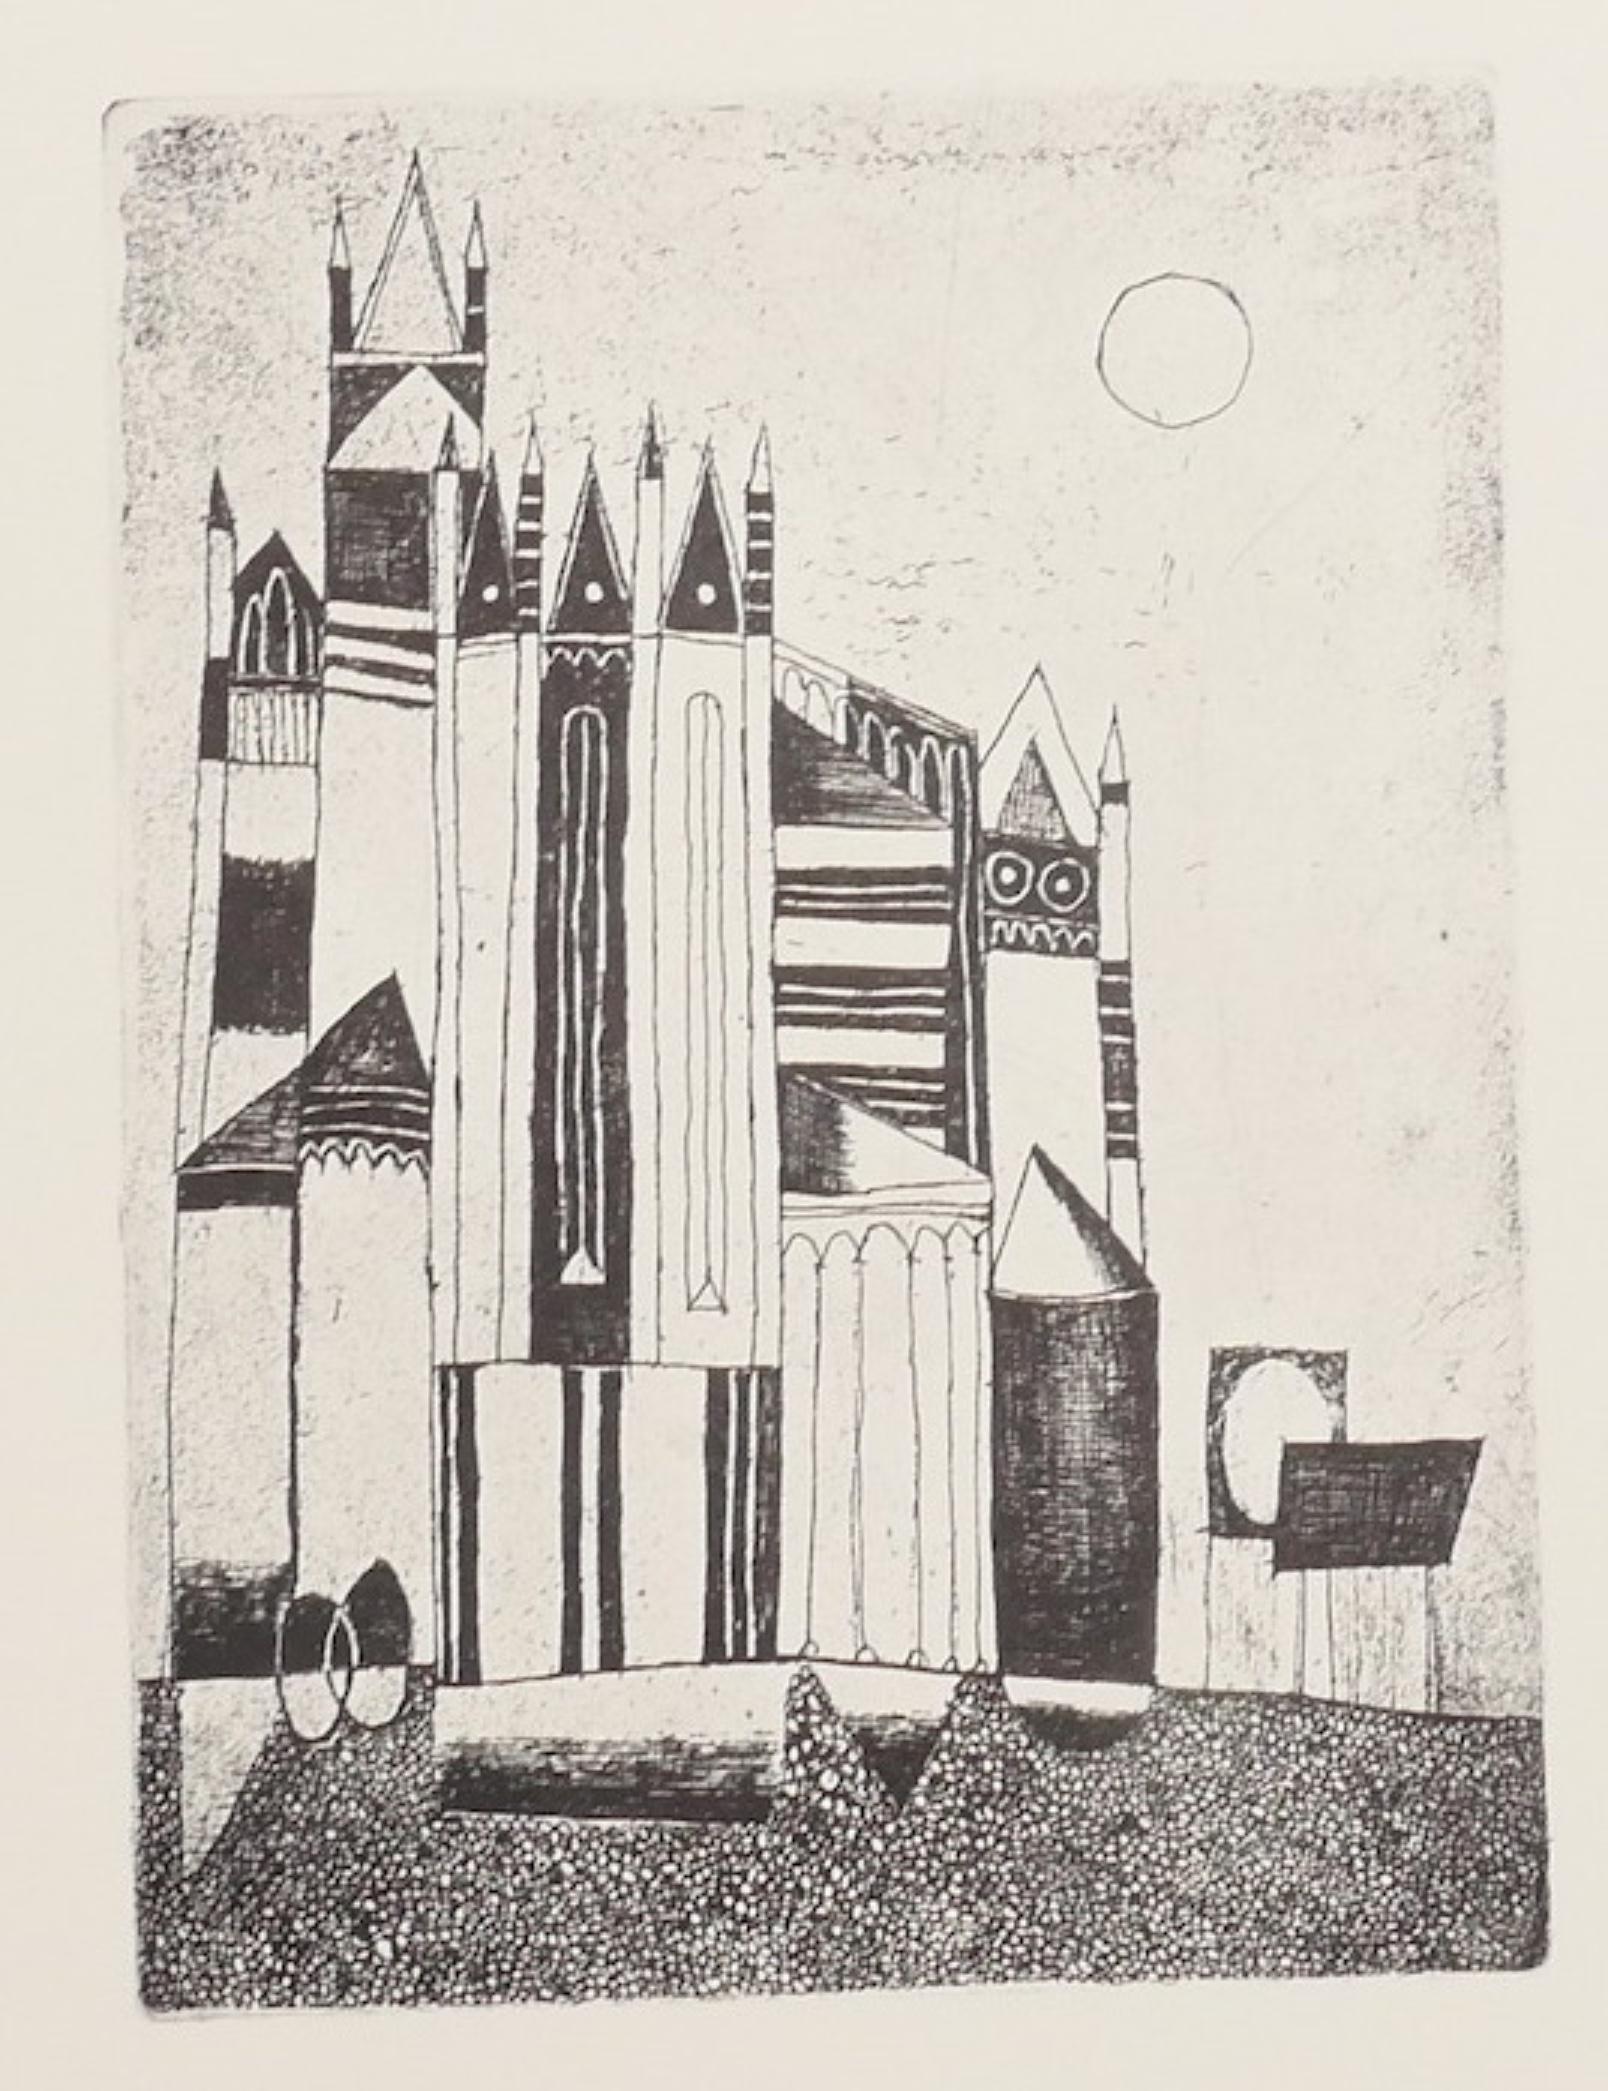 The Cathedral - Original Offset Print by Franco Gentilini - 1970s